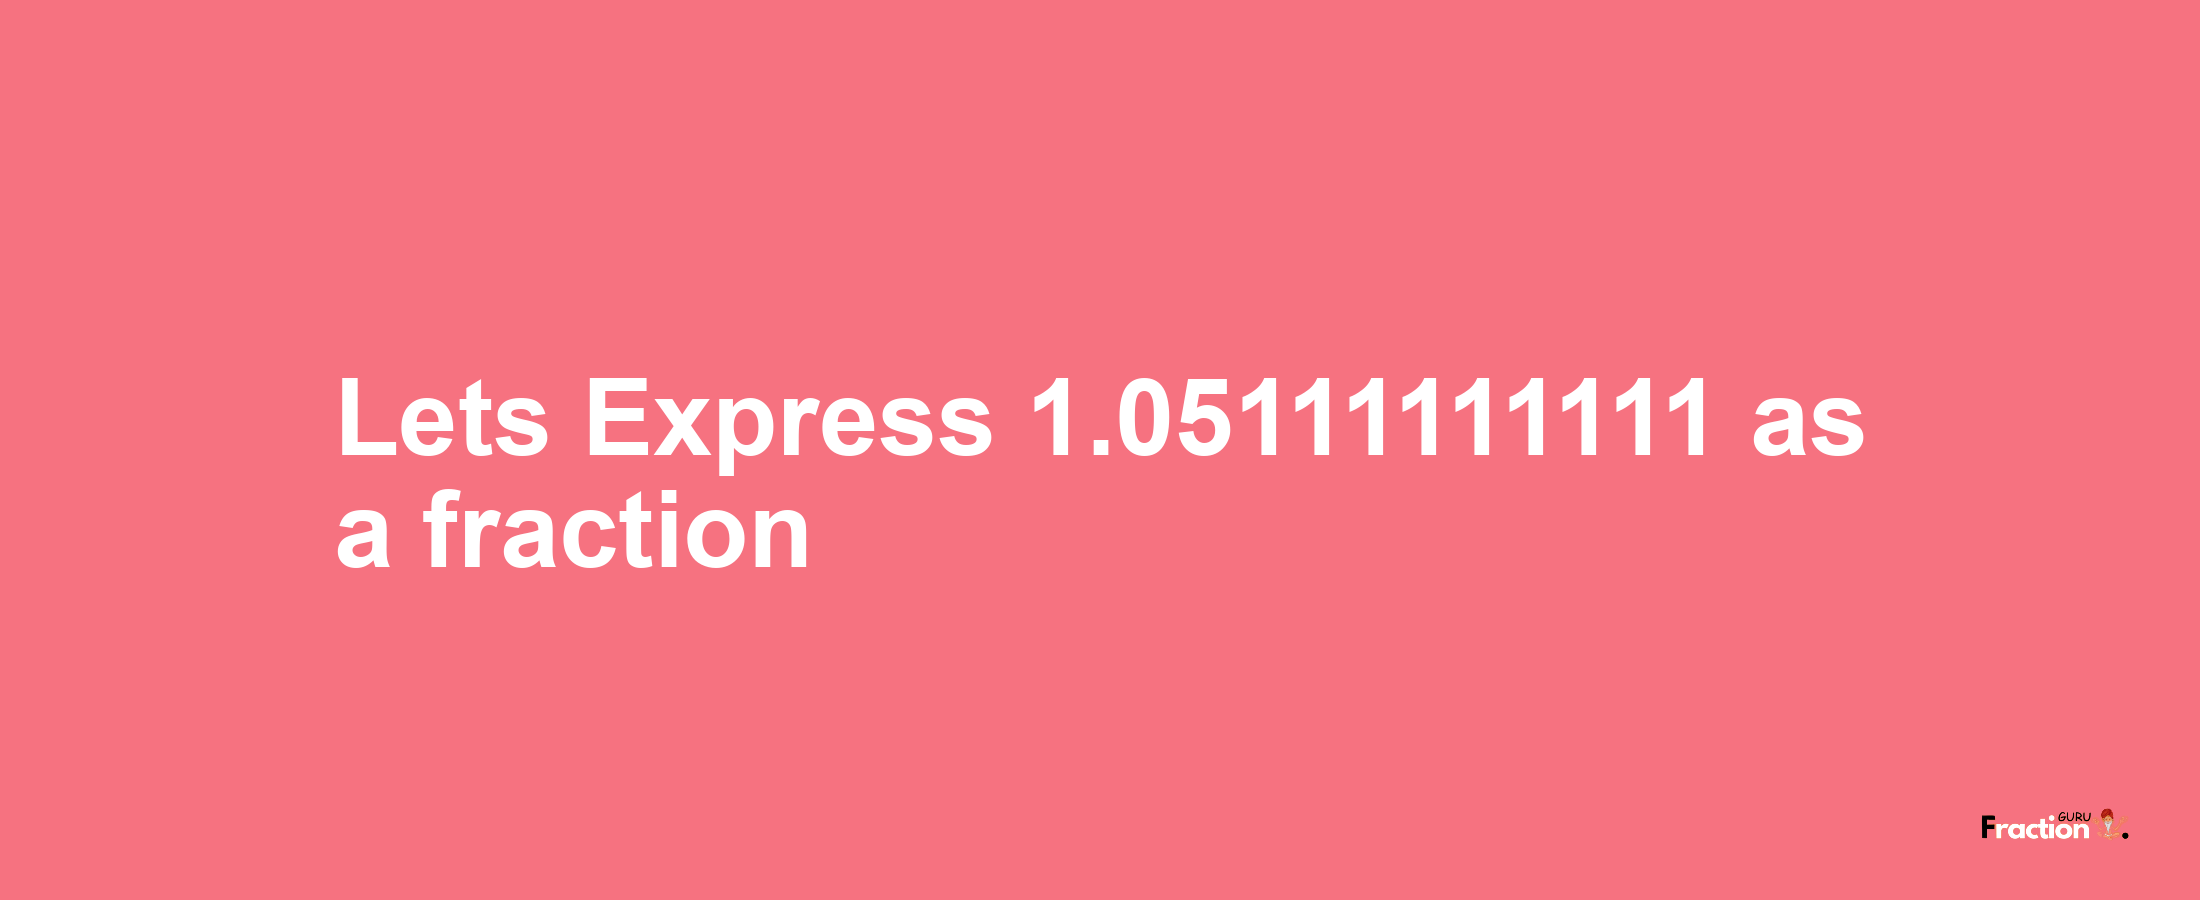 Lets Express 1.05111111111 as afraction